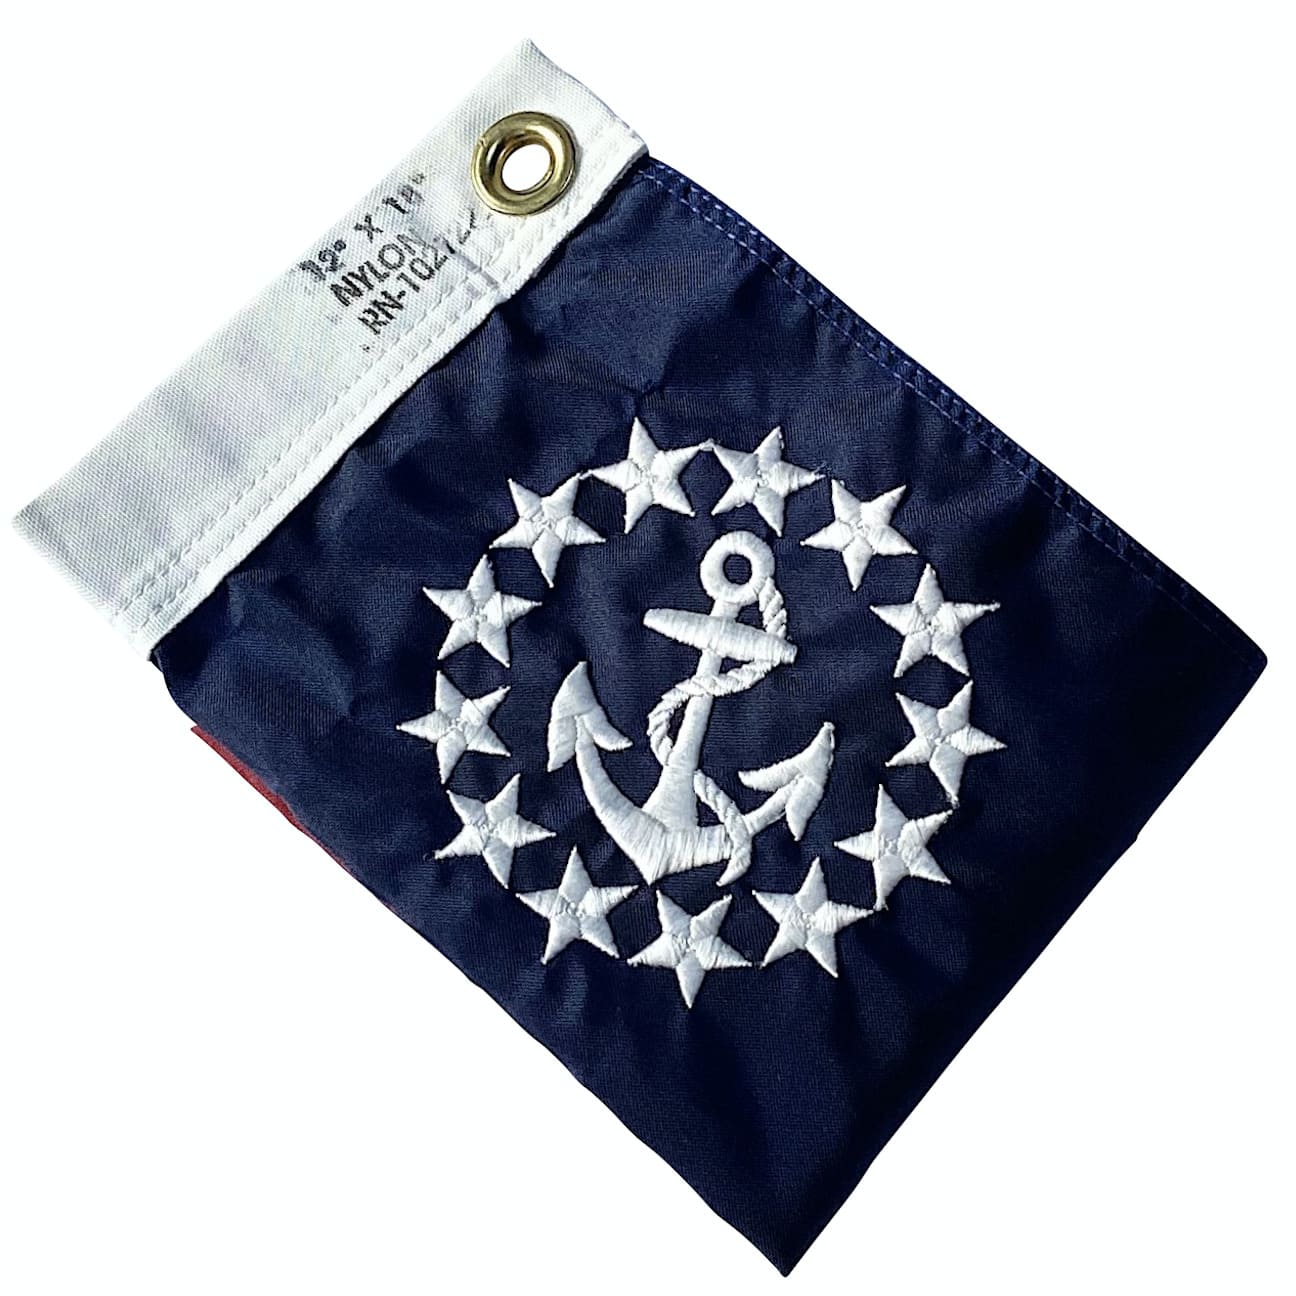 12"x18" Yacht Flag - Made in USA